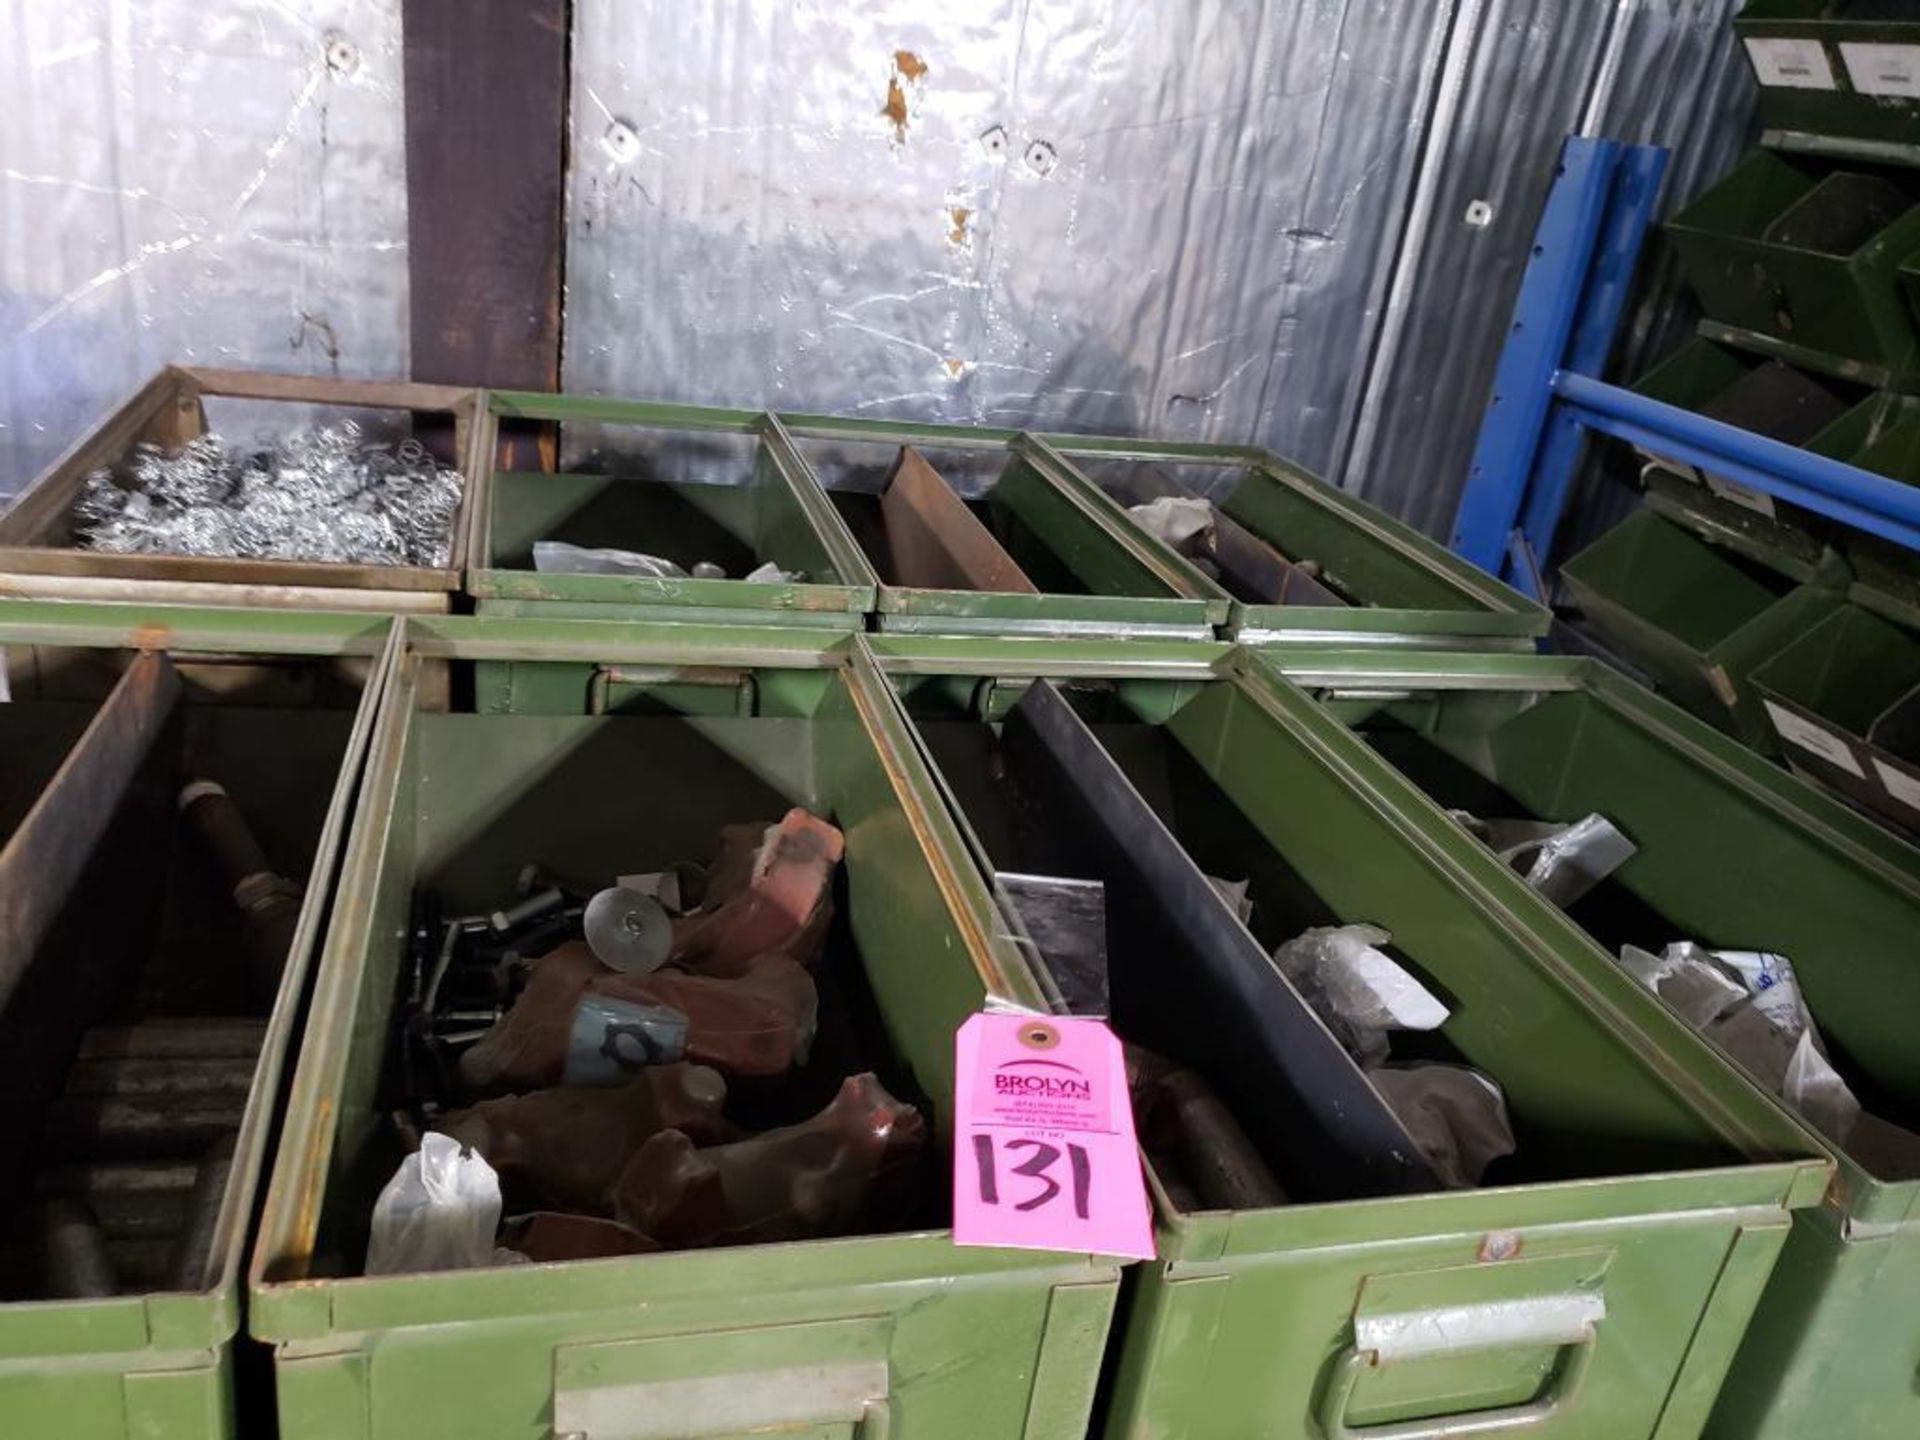 Pallet of assorted hardware and stack on bins.